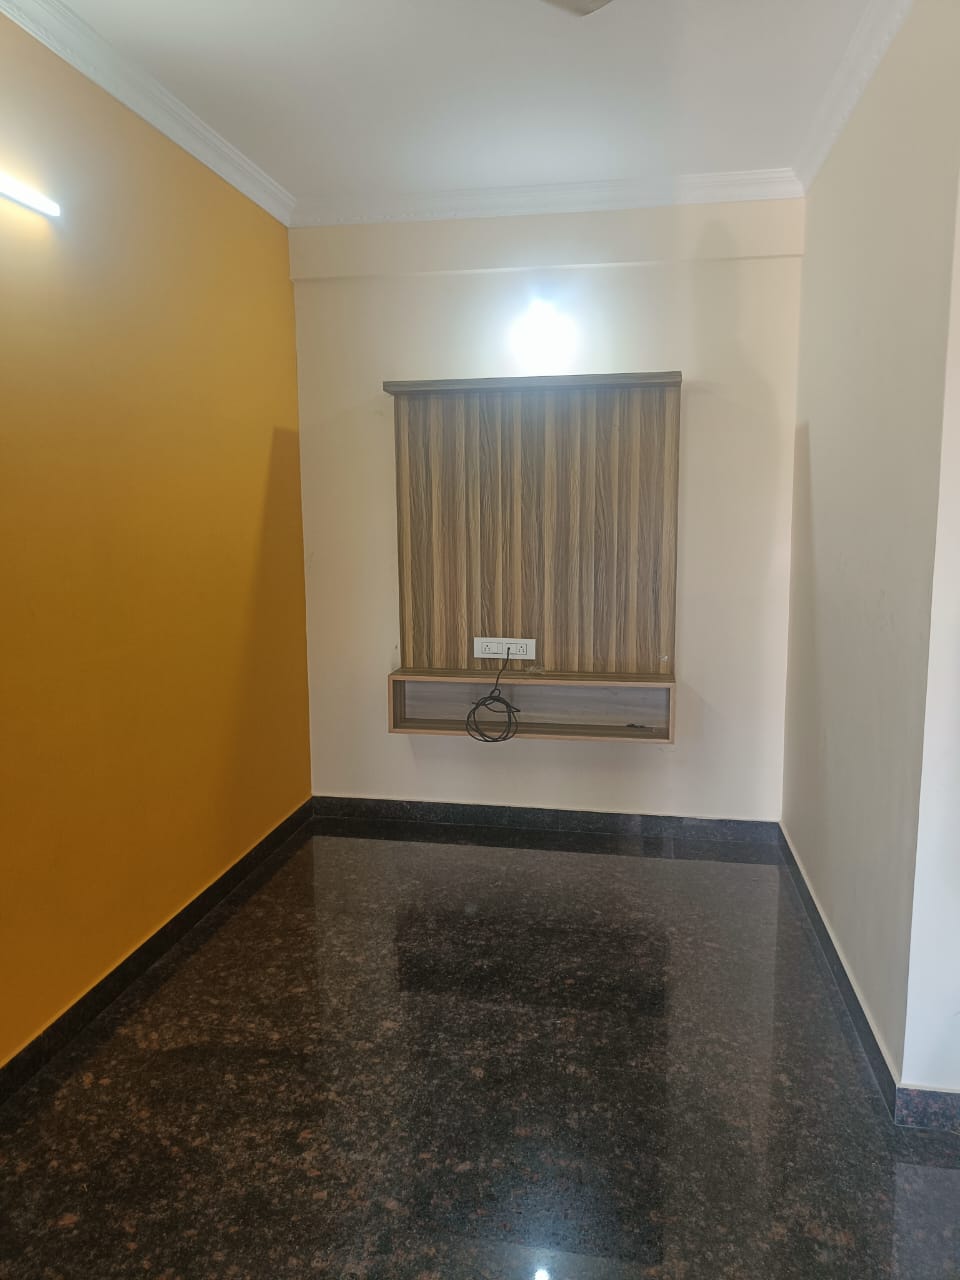 1 BHK Independent House for Lease Only at JAML2 - 2438 in Indira Nagar